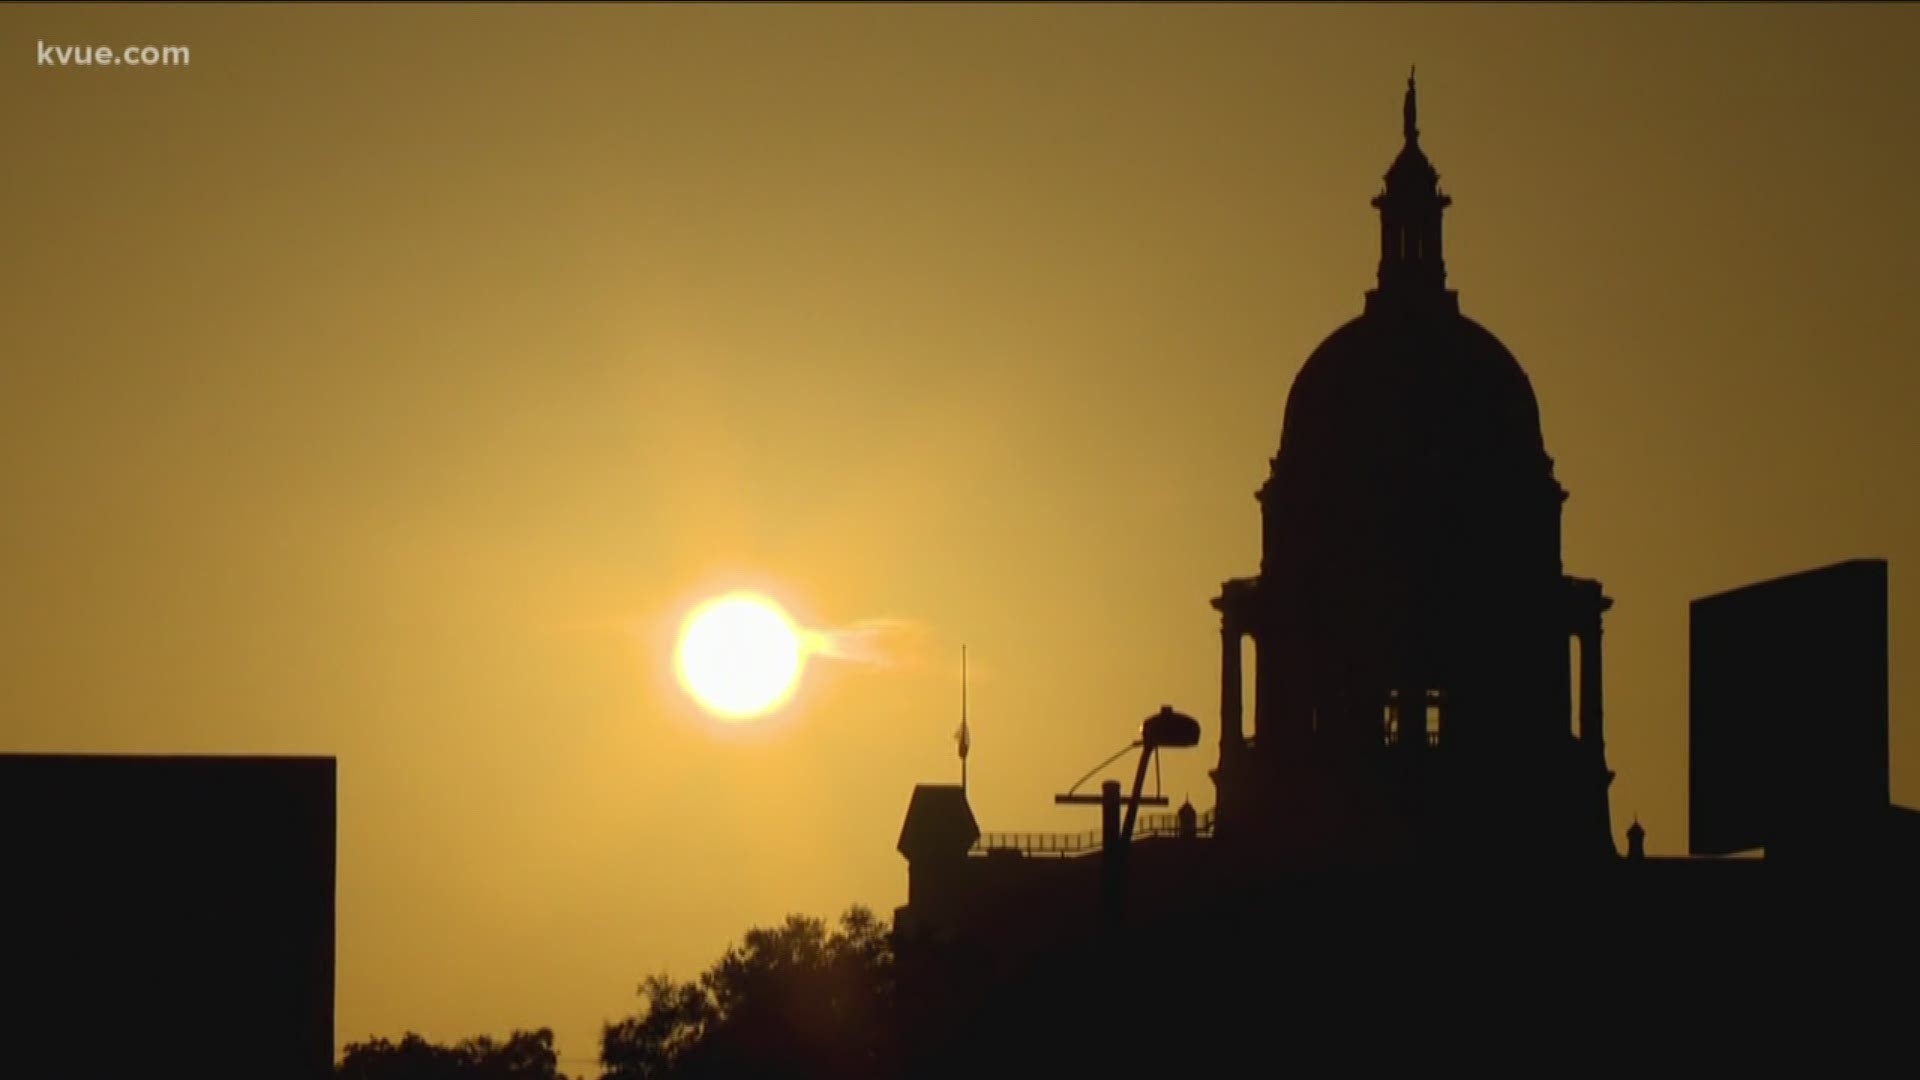 A bill that would let Texans choose to end daylight saving time is heading to the Senate.